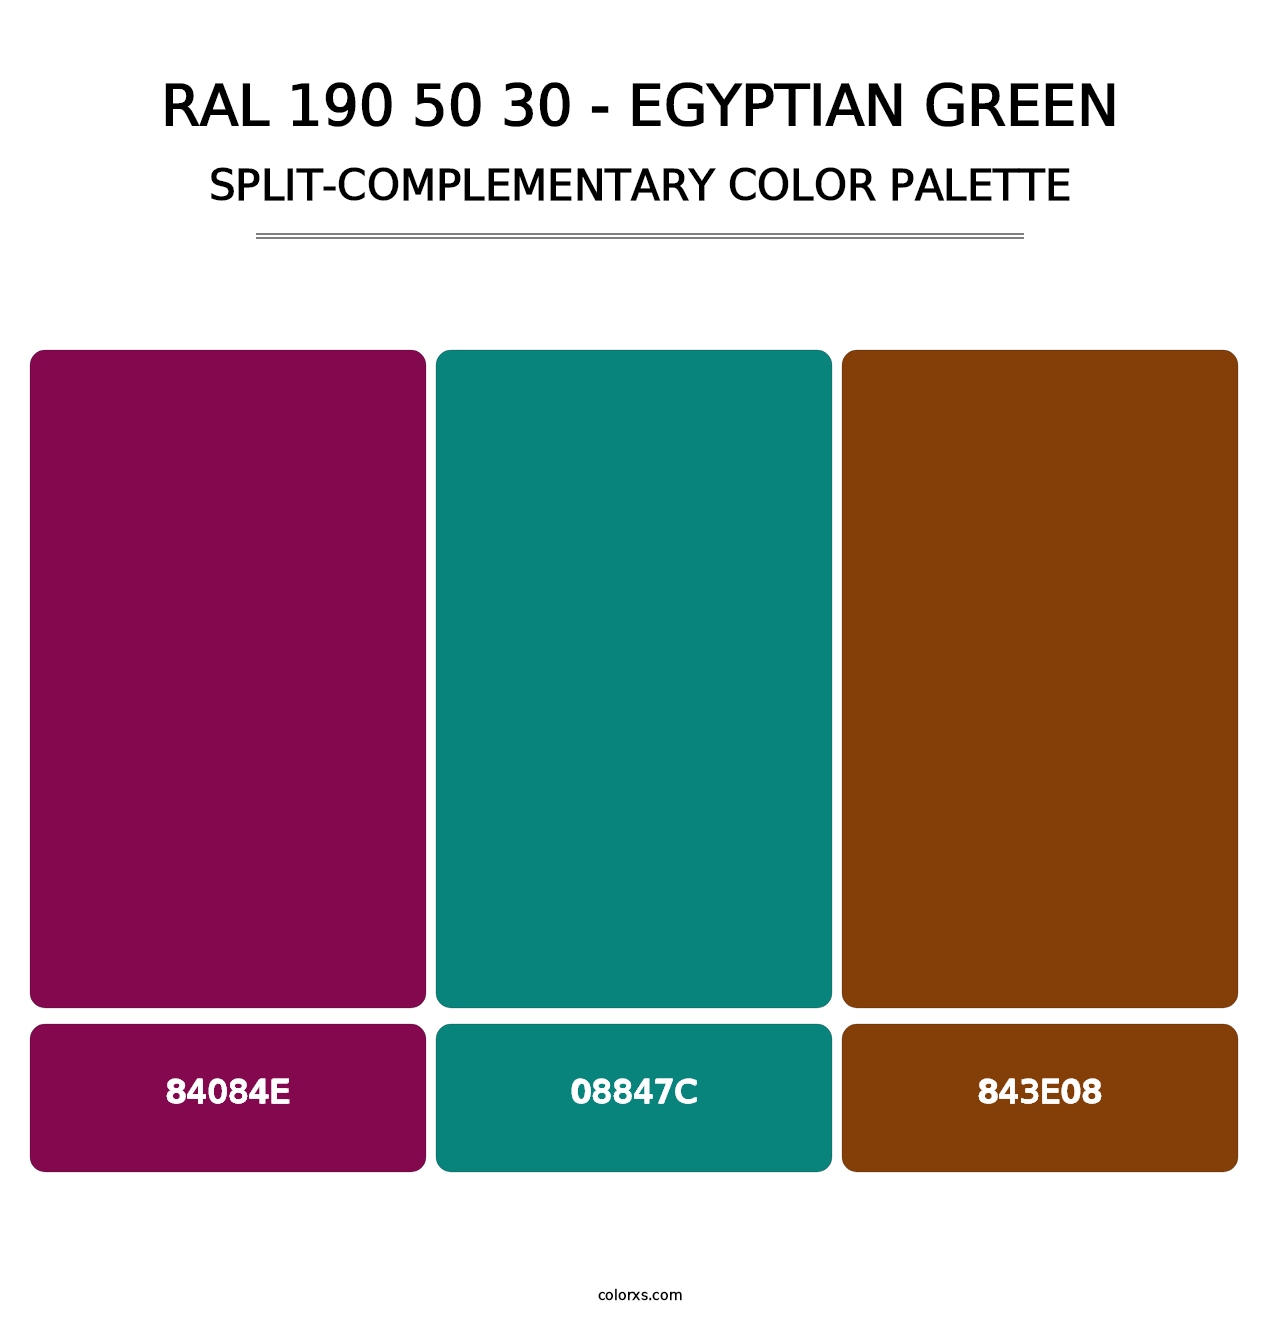 RAL 190 50 30 - Egyptian Green - Split-Complementary Color Palette